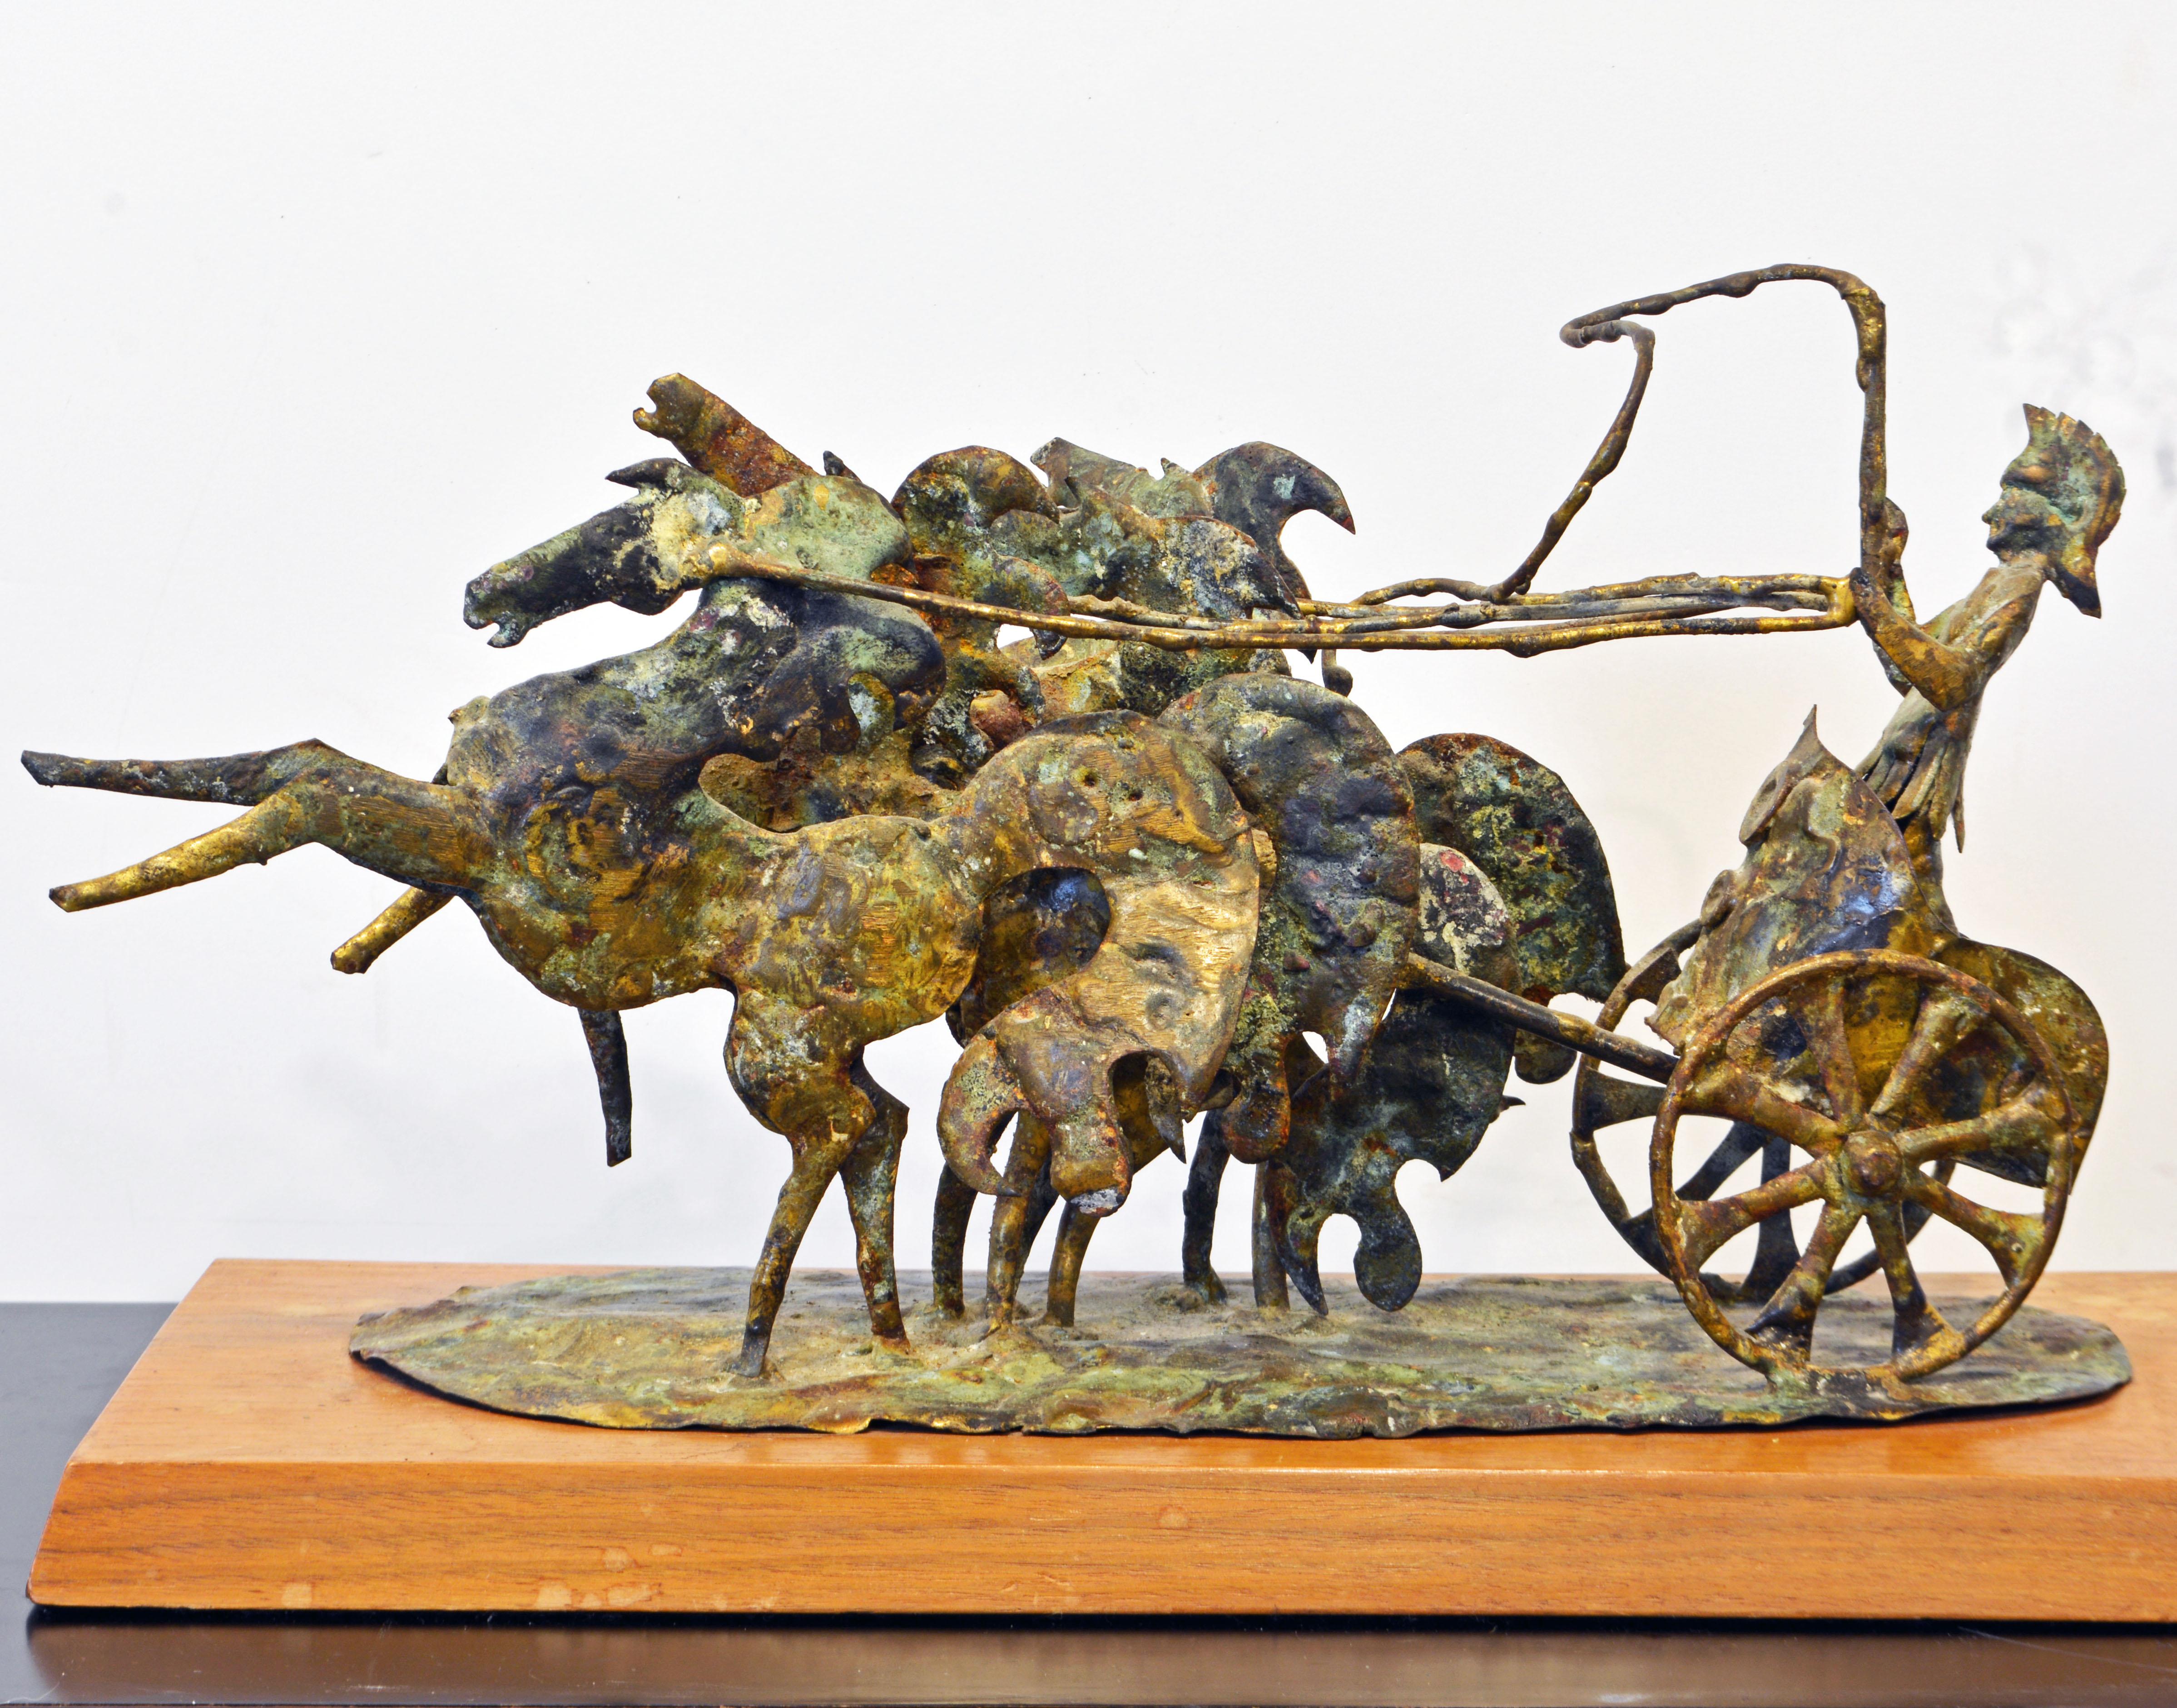 In this expressive bronze sculpture Bill Lett is capturing the ferocity and vigor of a Roman charioteer and his horses. The bronze has been patinated to a rich mottled surface and is resting on a wood base bearing a small artist plaque.

Bill